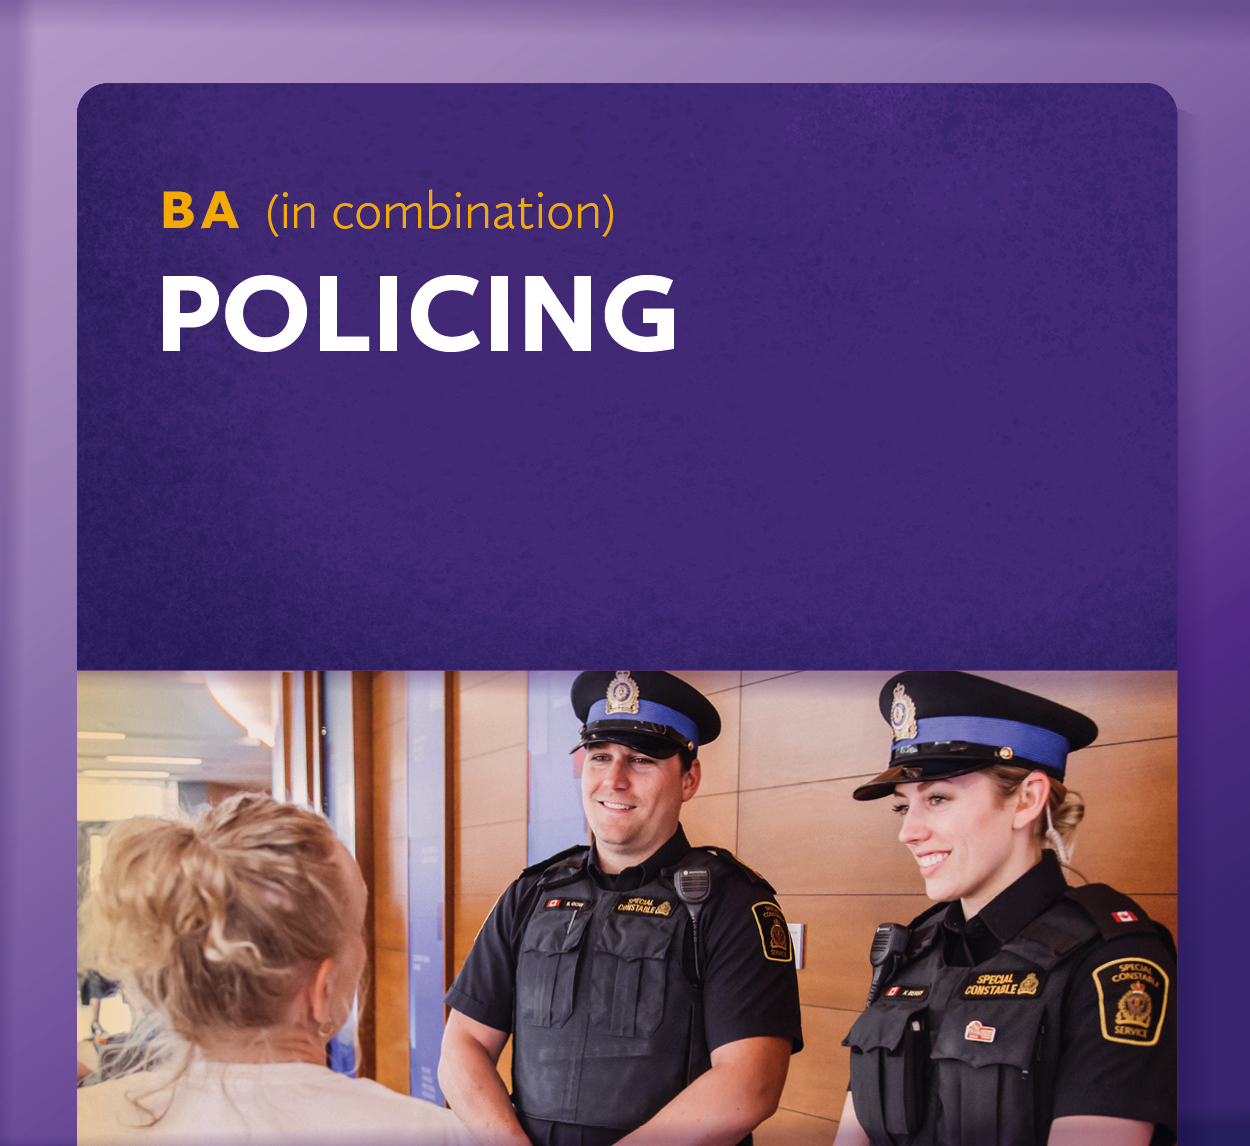 Showcase Image for Policing (BA)